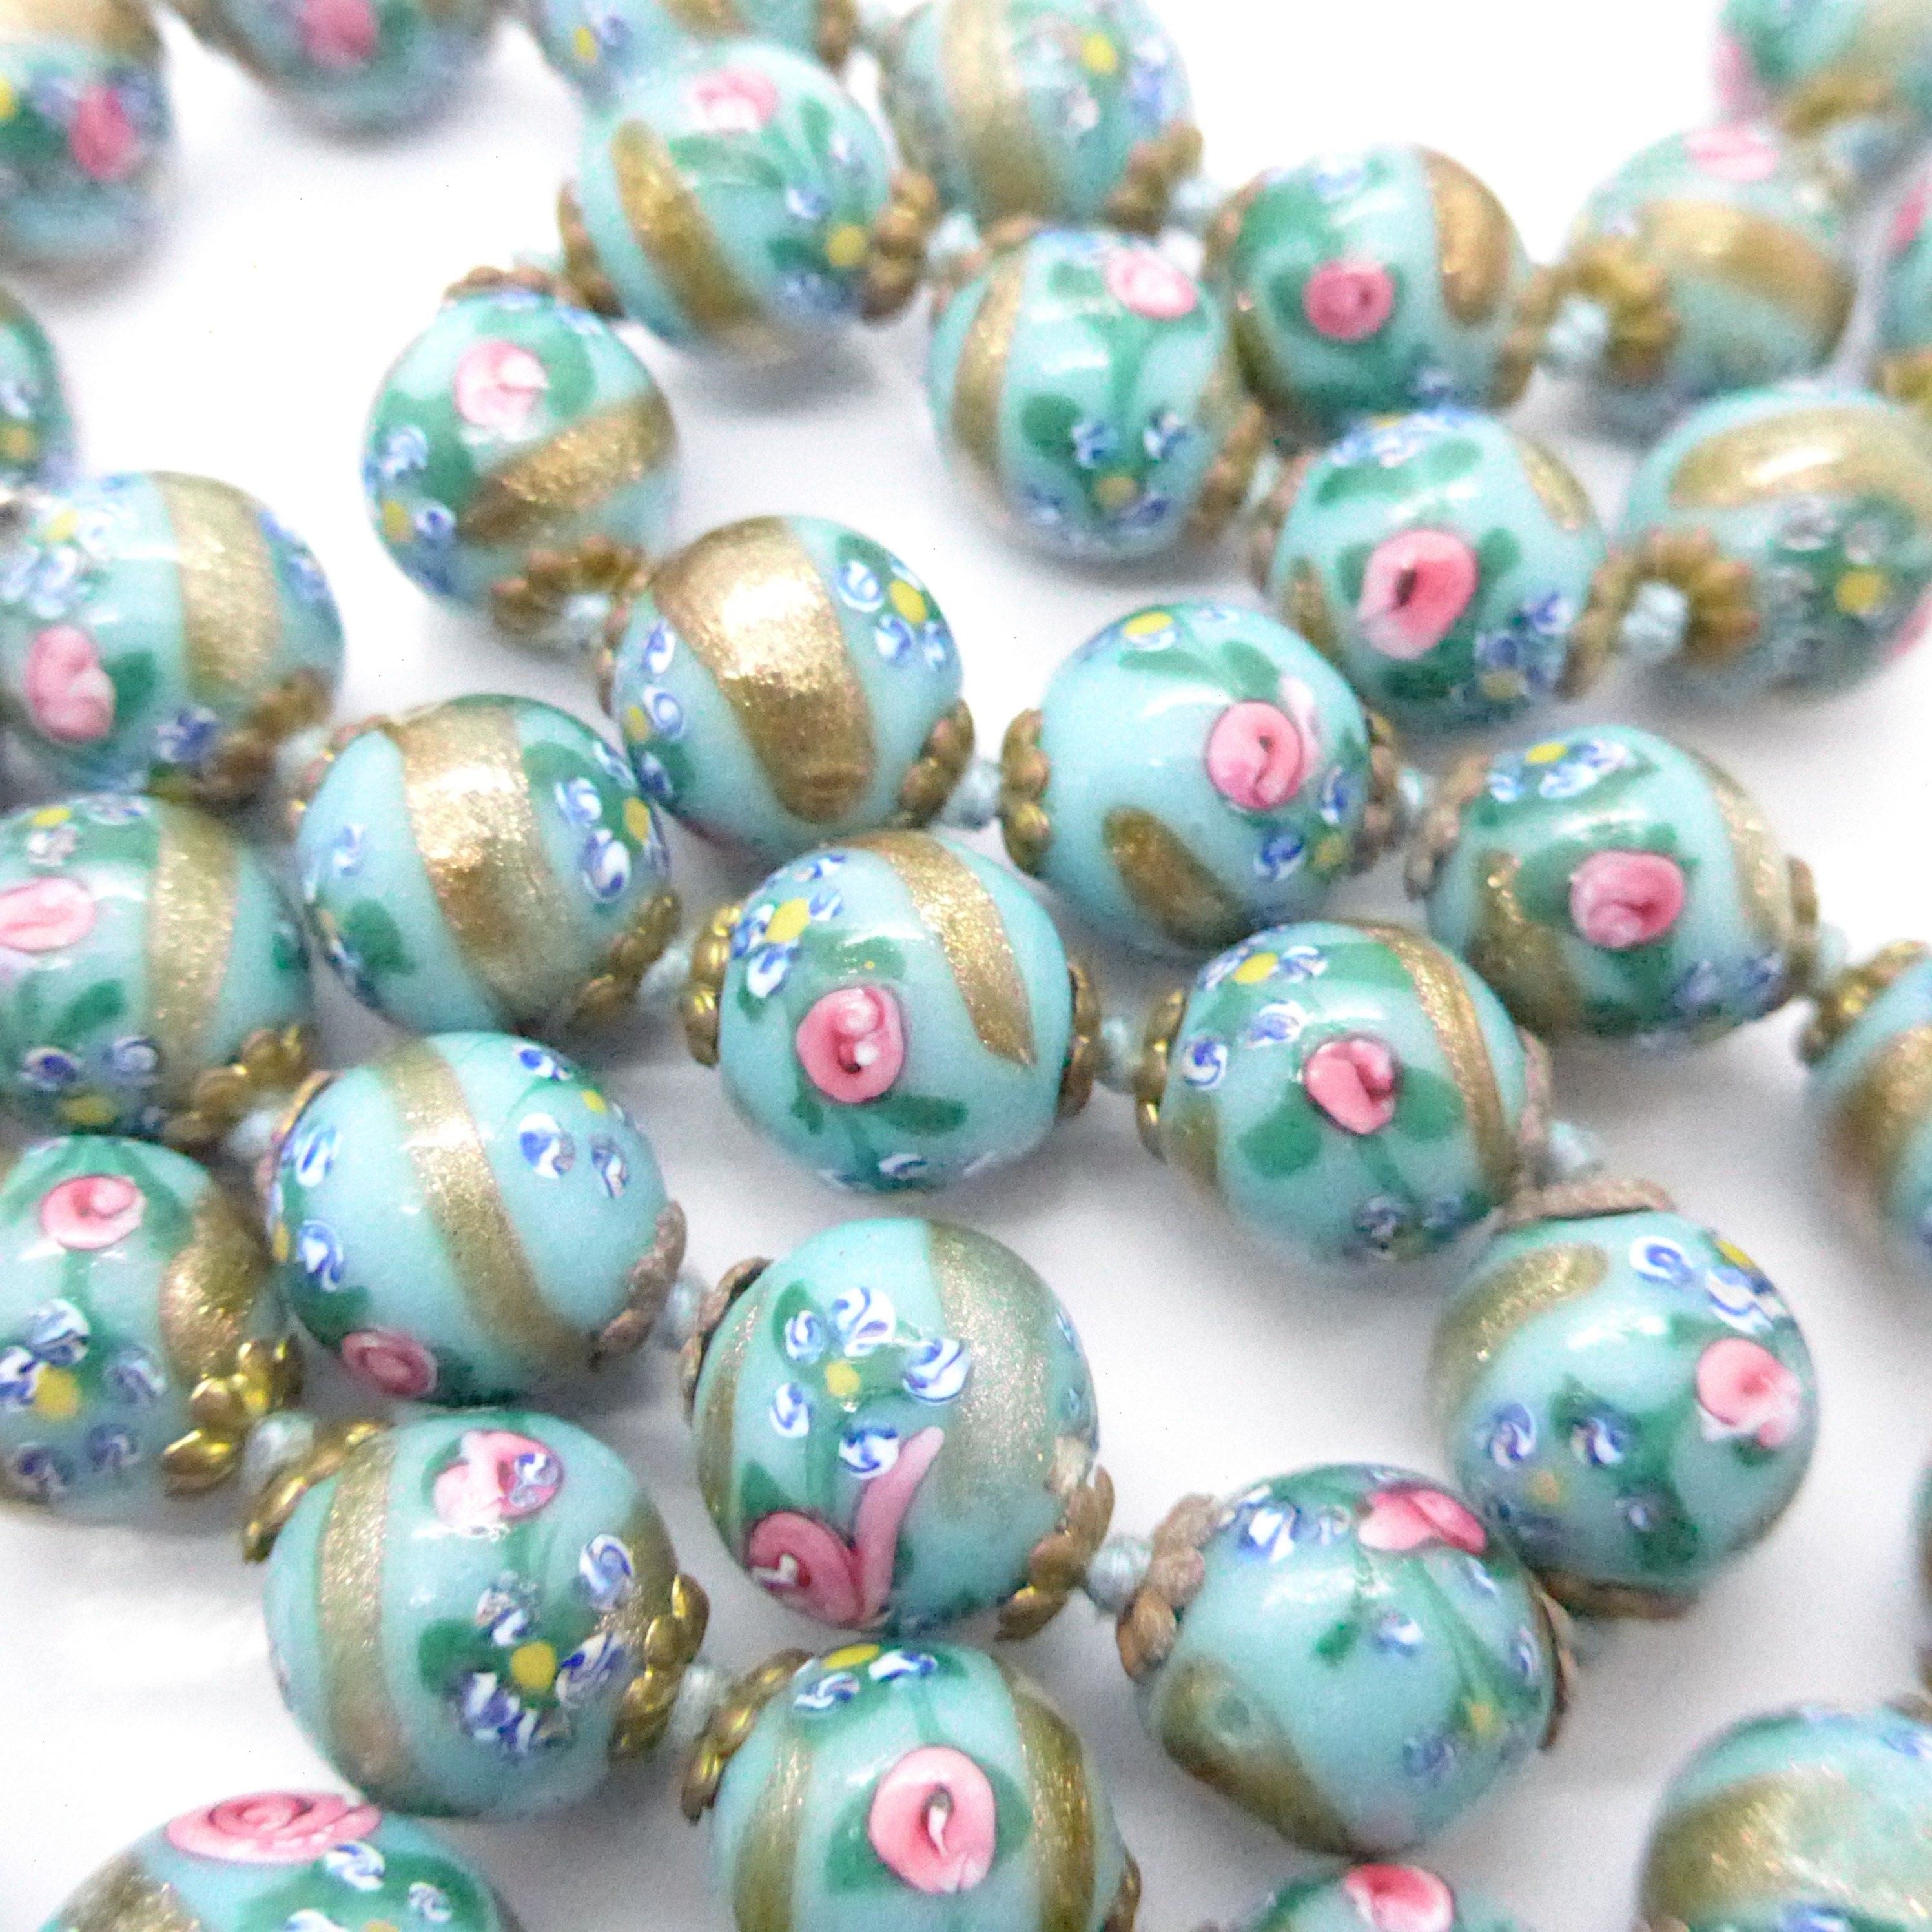 2 Collectable Vintage Venetian Fancy Beads, Vintage Murano Glass